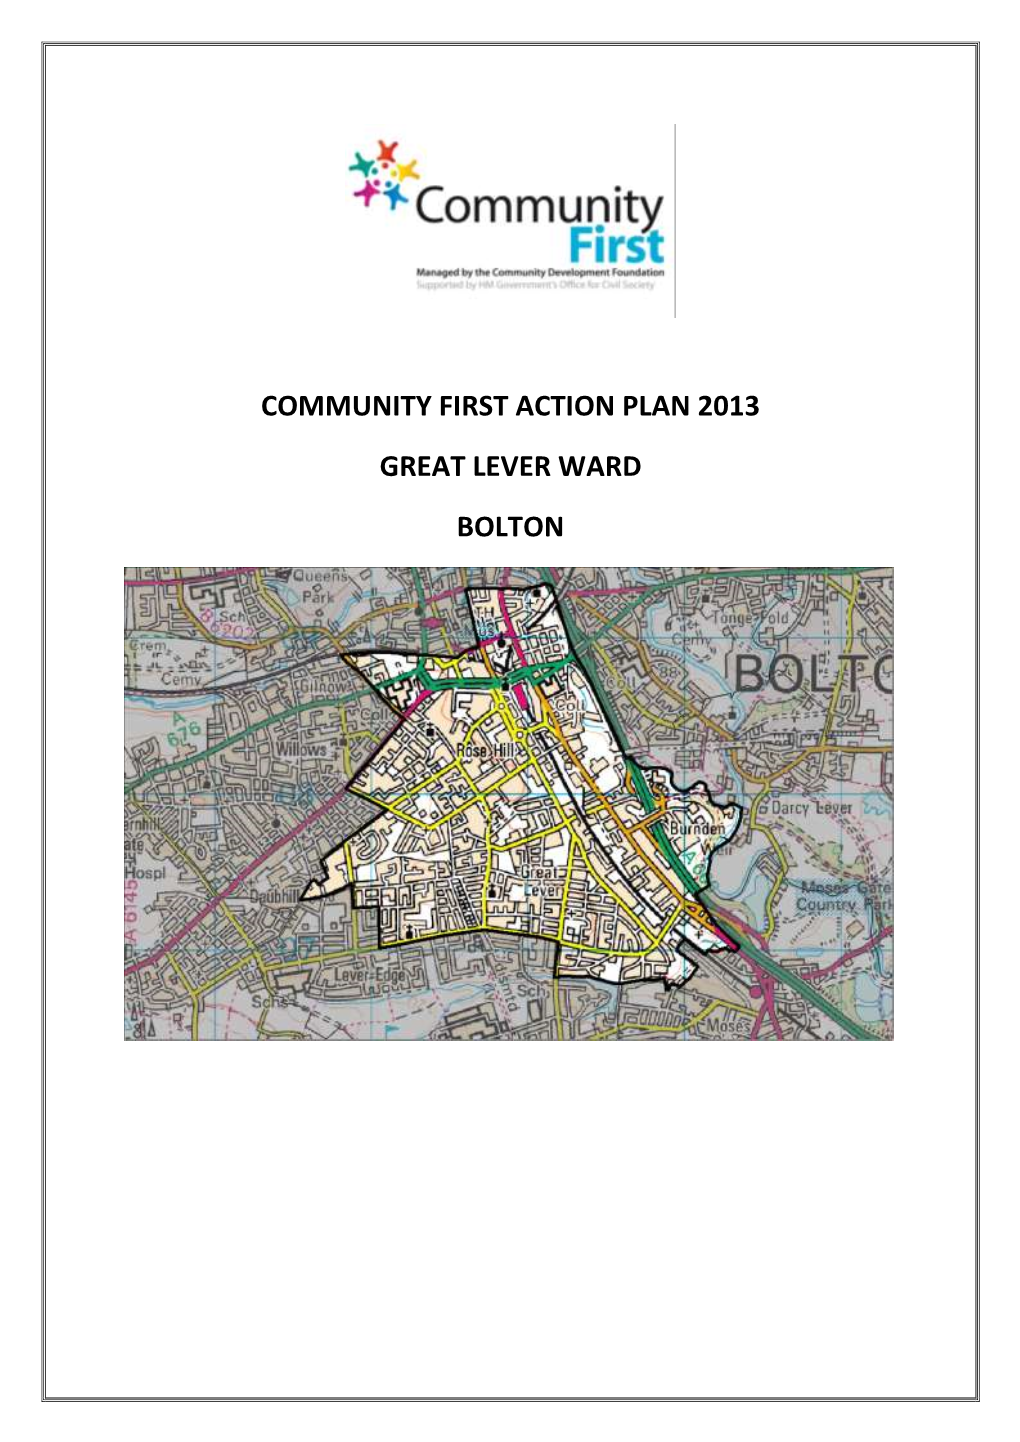 Community First Action Plan 2013 Great Lever Ward Bolton